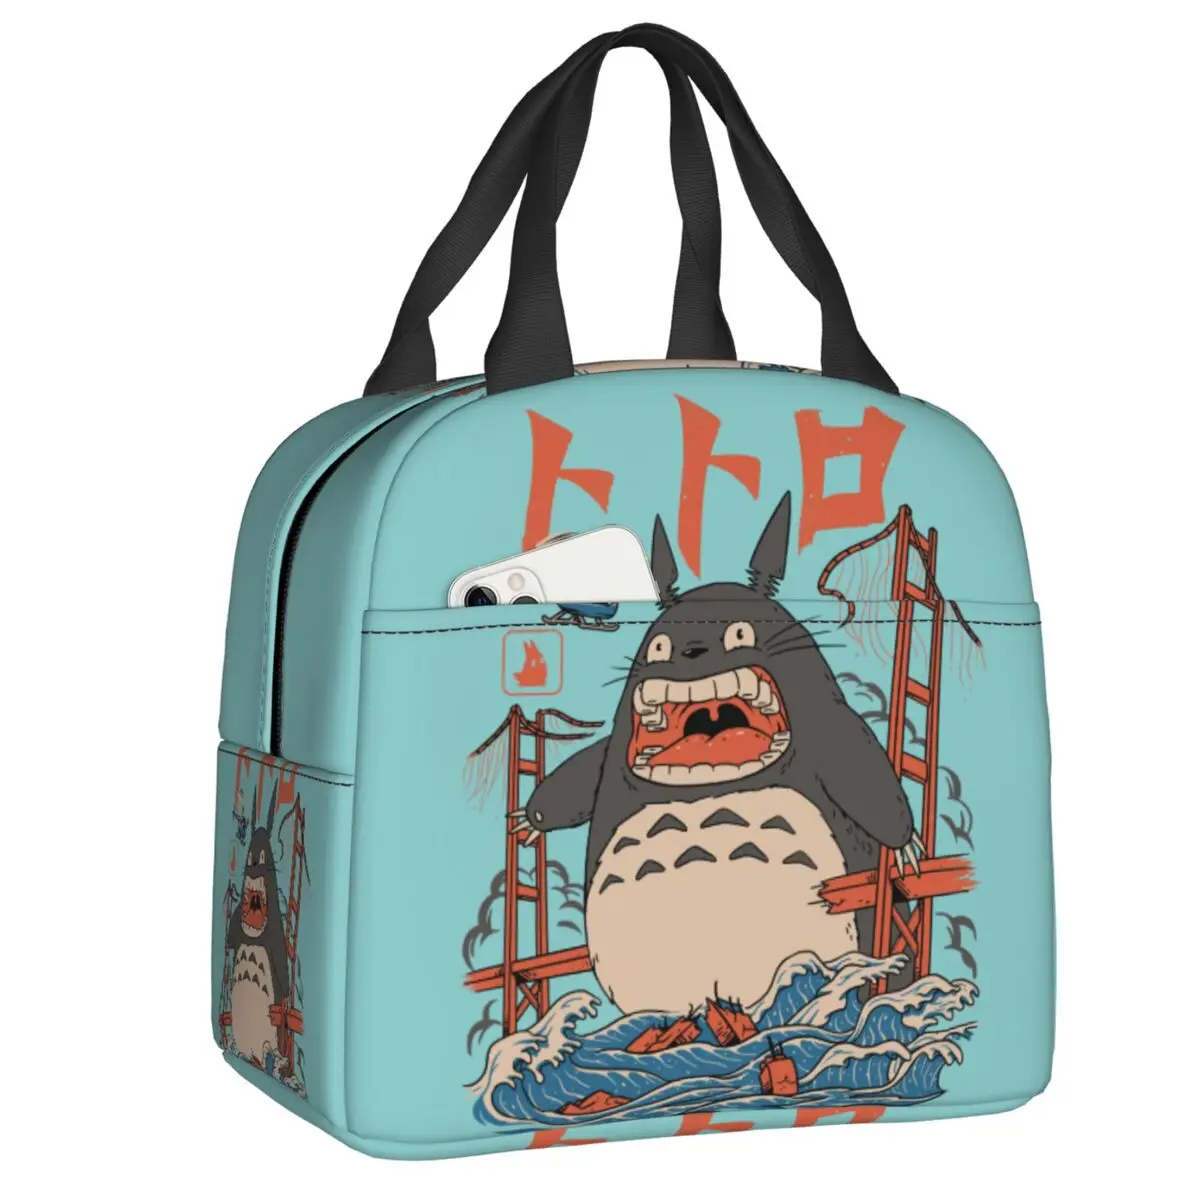 My Neighbor Totoro Attack Resuable Lunch Box for Women Cooler Thermal Food Insulated Studio Ghibli Lunch Bag School Children